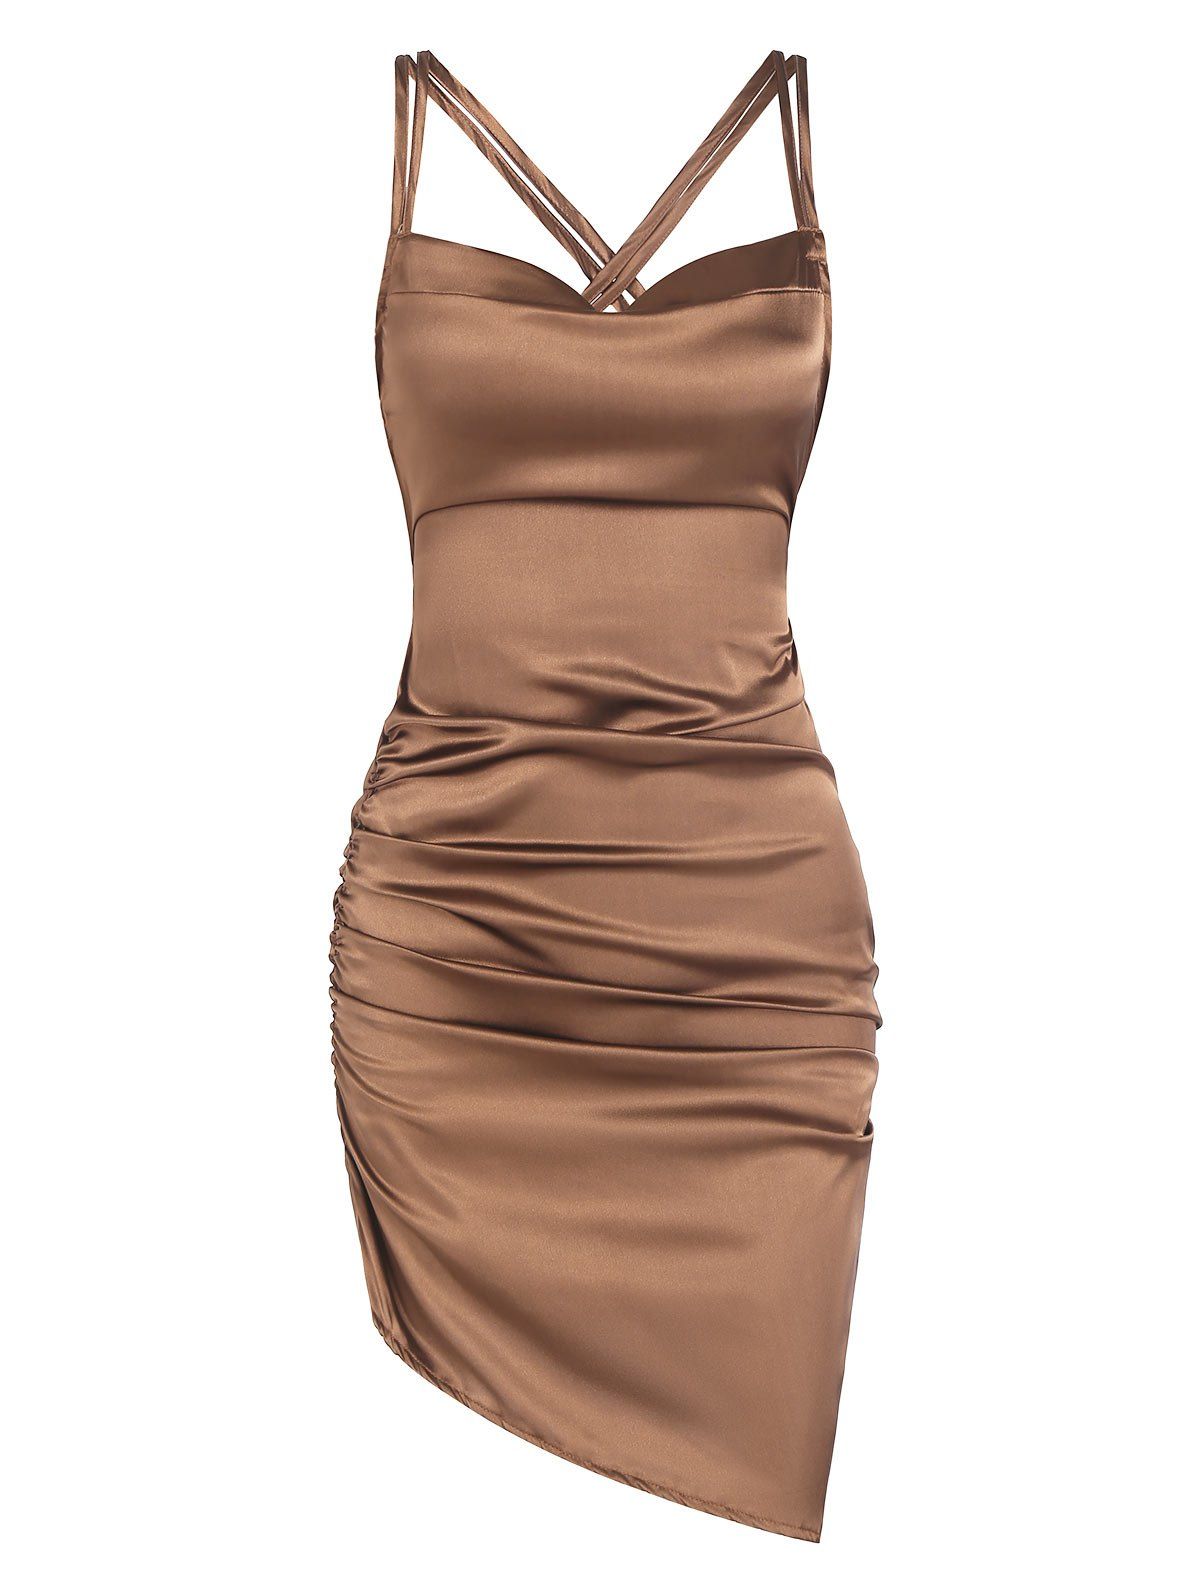 Satin Ruched Lace Up Asymmetric Dress - COFFEE M